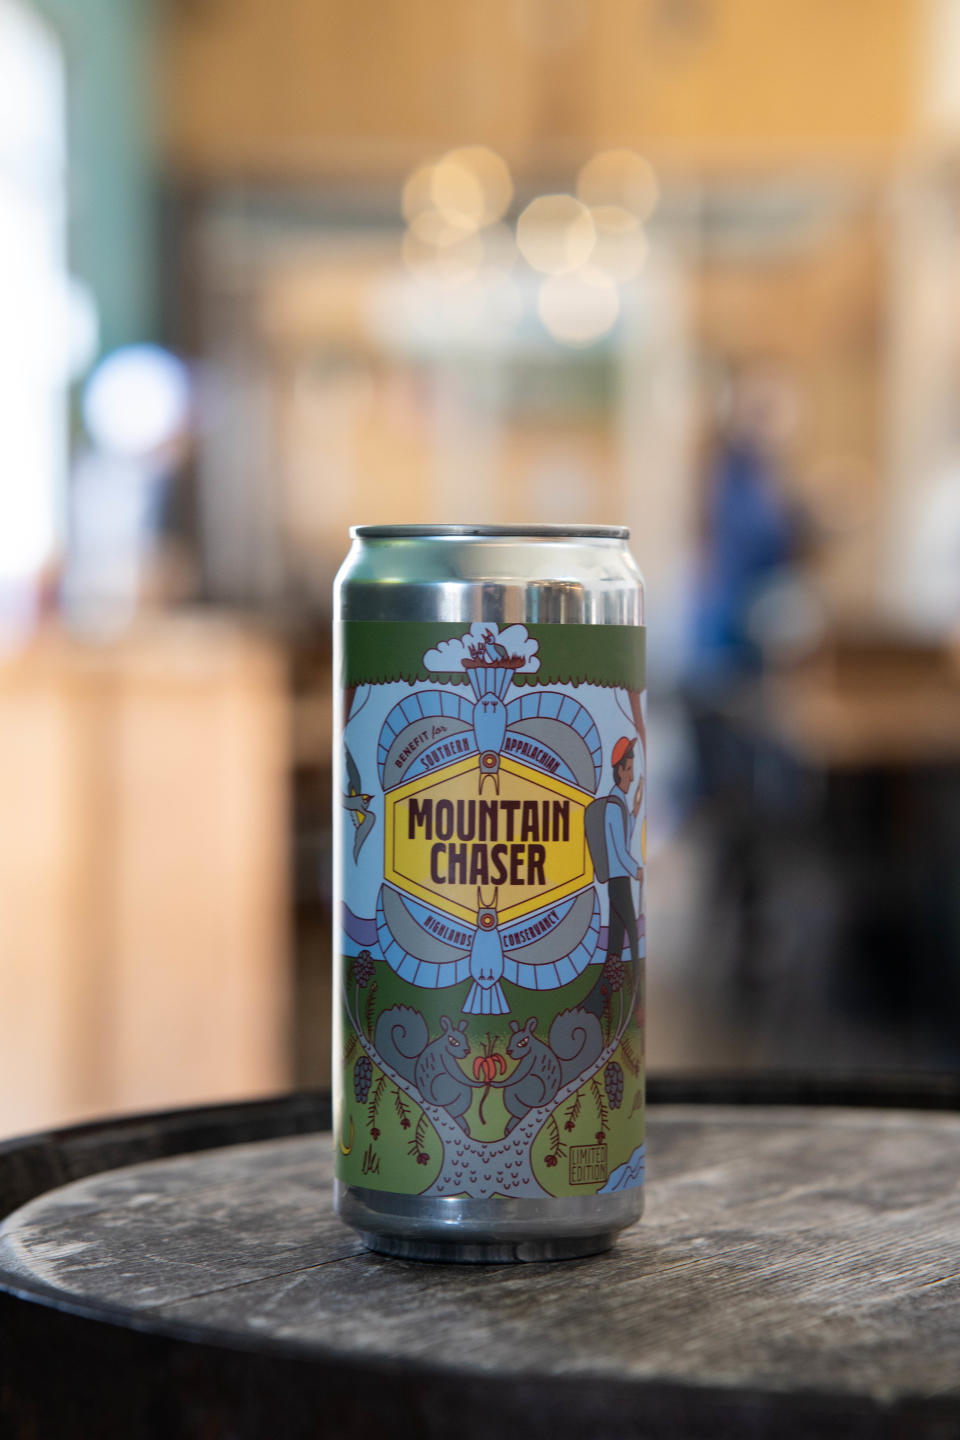 In April, Highland Brewing released the Mountain Chaser Hazy Pale Ale, in collaboration with Southern Appalachian Highlands Conservancy.